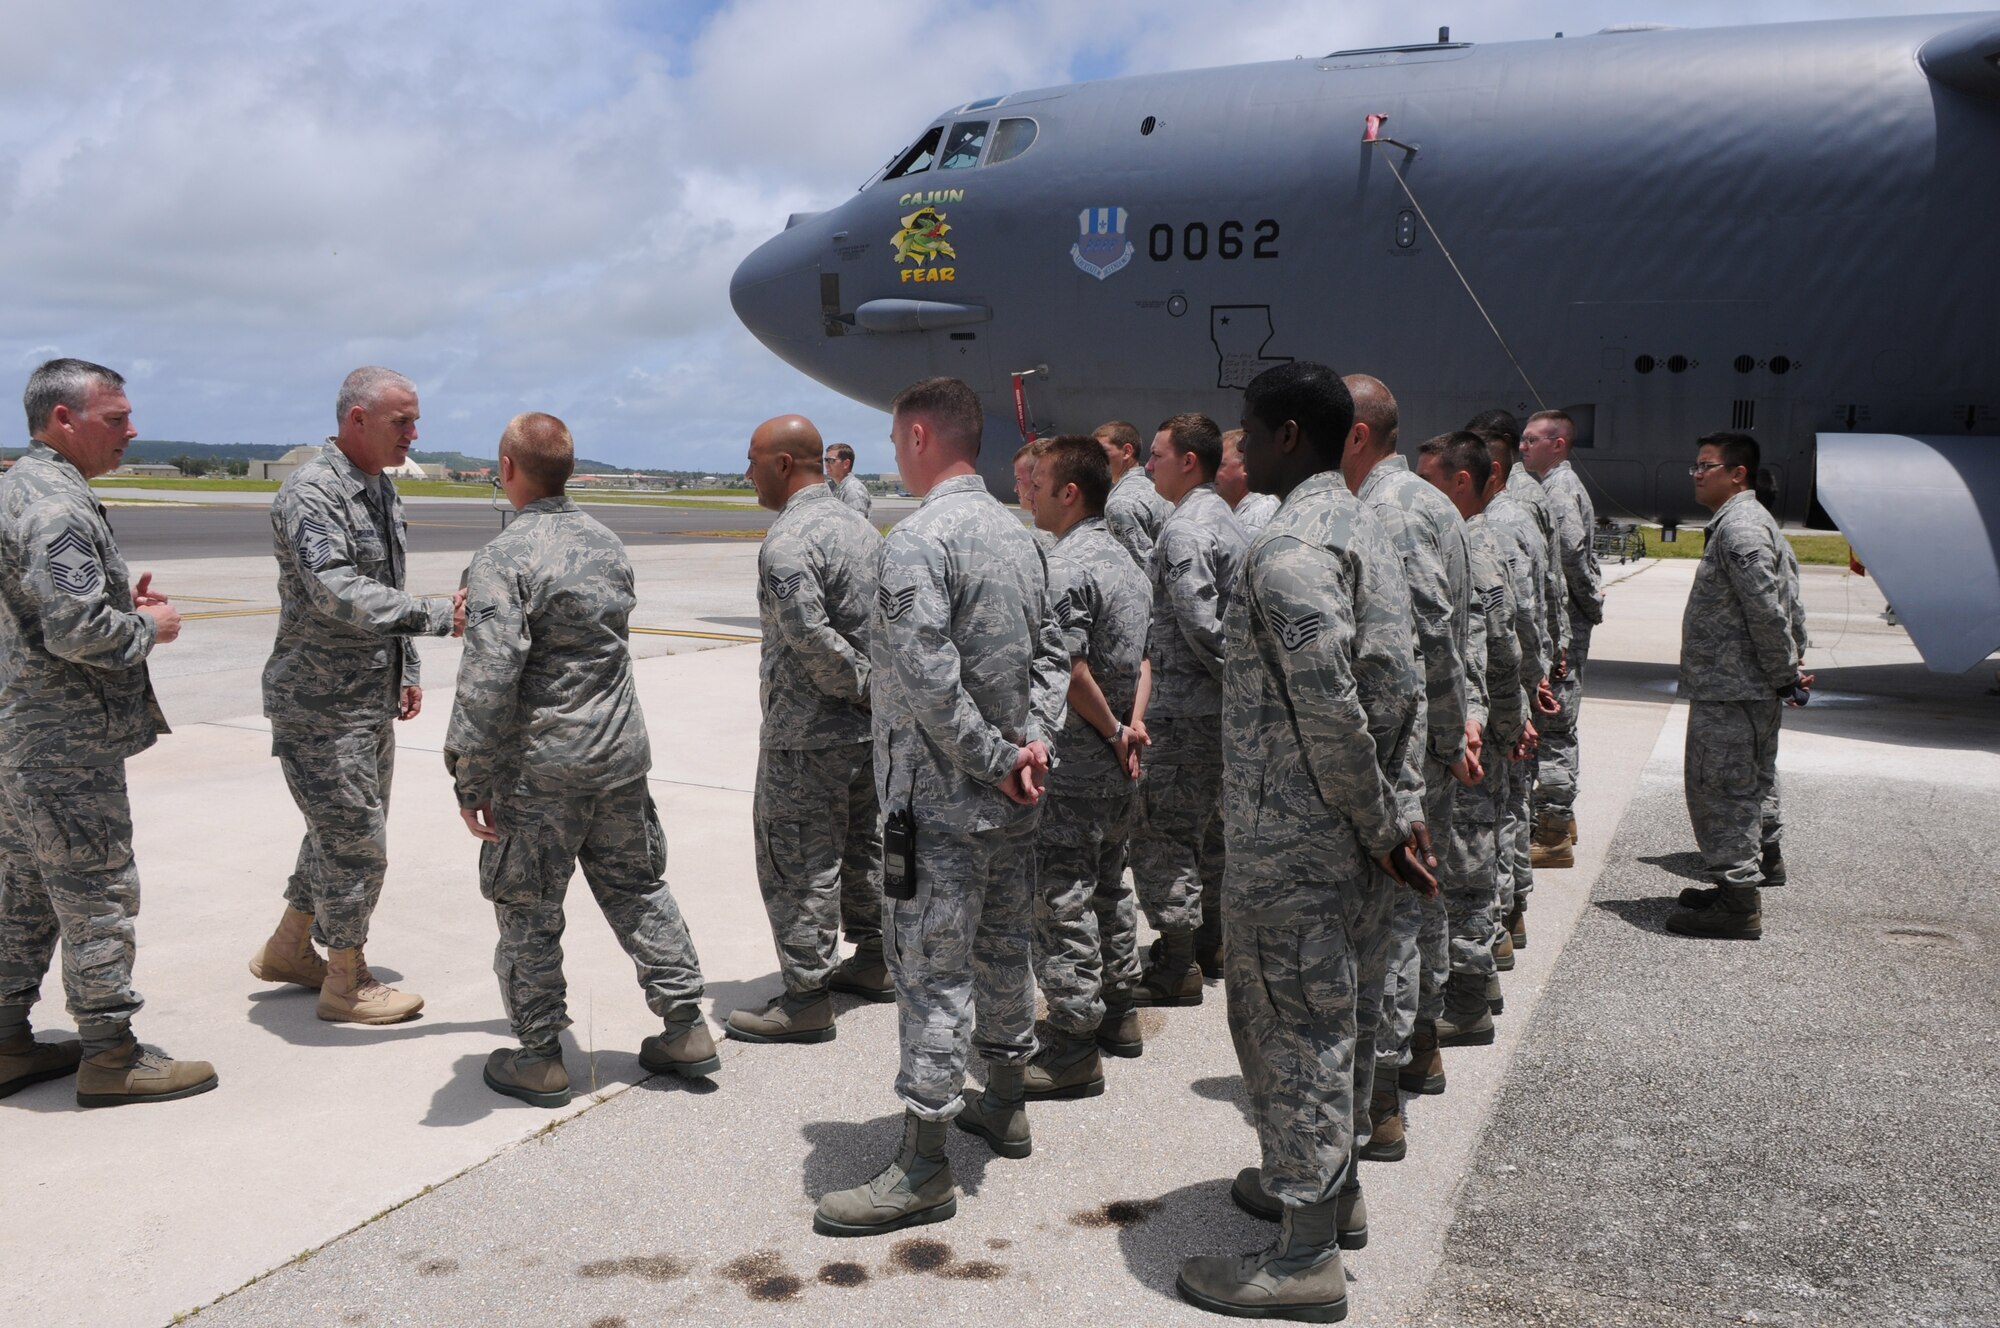 Chief Master Sgt. Brooke McLean, Pacific Air Forces command chief, meets with members of the 96th Expeditionary Bomb Squadron deployed in from Barksdale Air Force Base, Louisiana in support of Team Andersen's continuous bomber presence June 1. During the B-52 Stratofortress tour the chief was shown weapons bays and safety features on the aircraft. (U.S. Air Force photo/ Senior Airman Carlin Leslie)